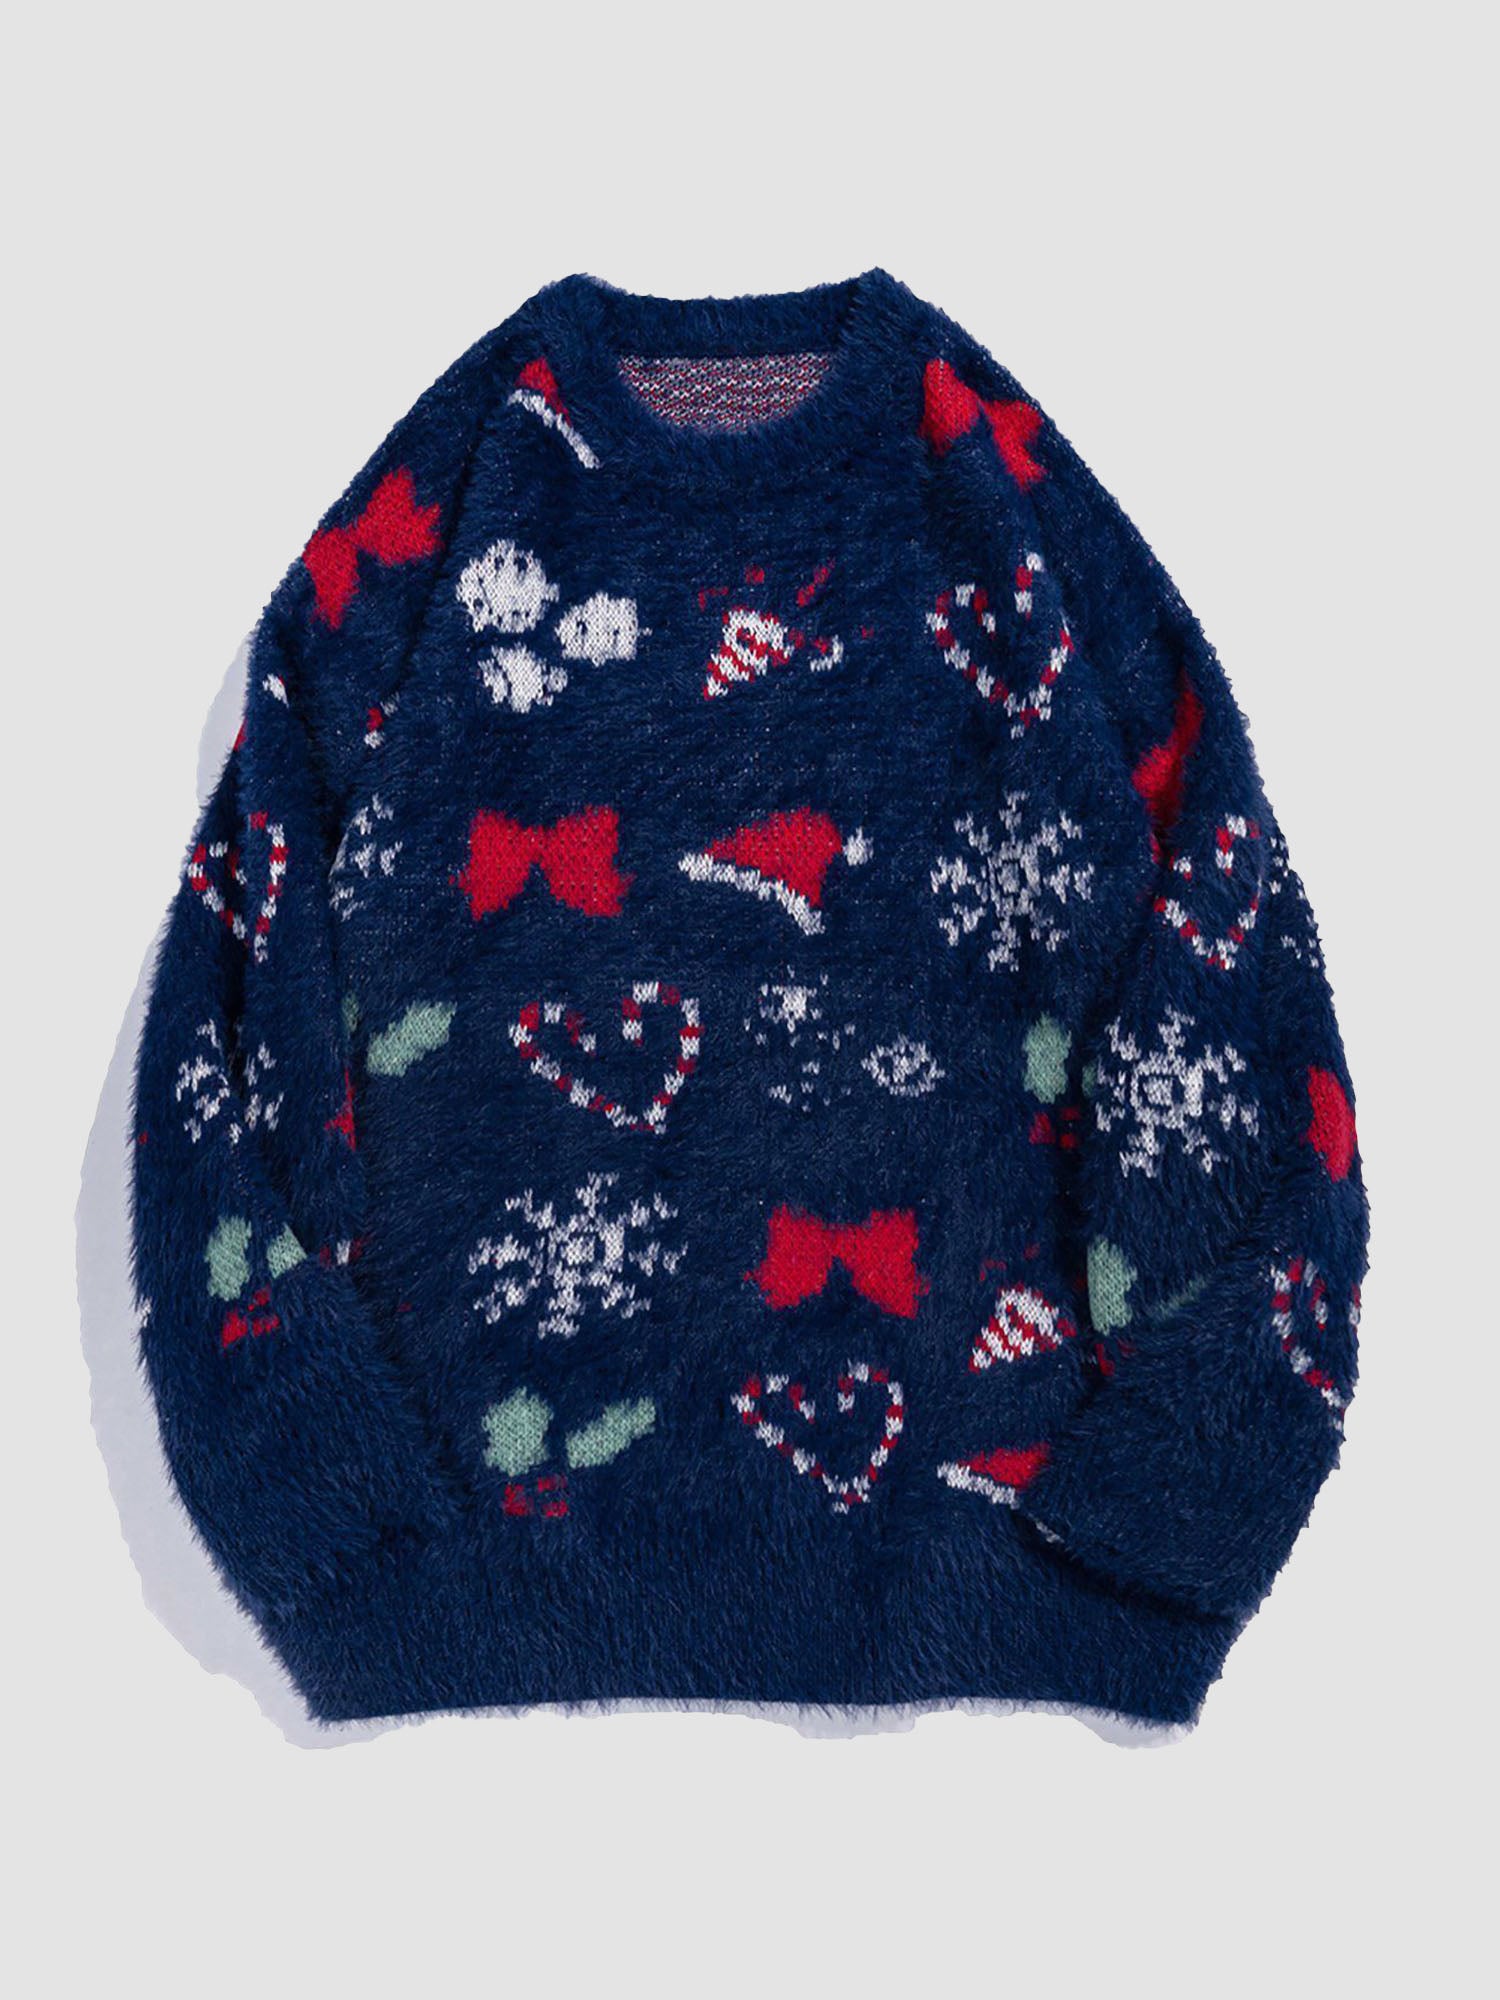 JUSTNOTAG Christmas Elements Printed Knitted Sweater